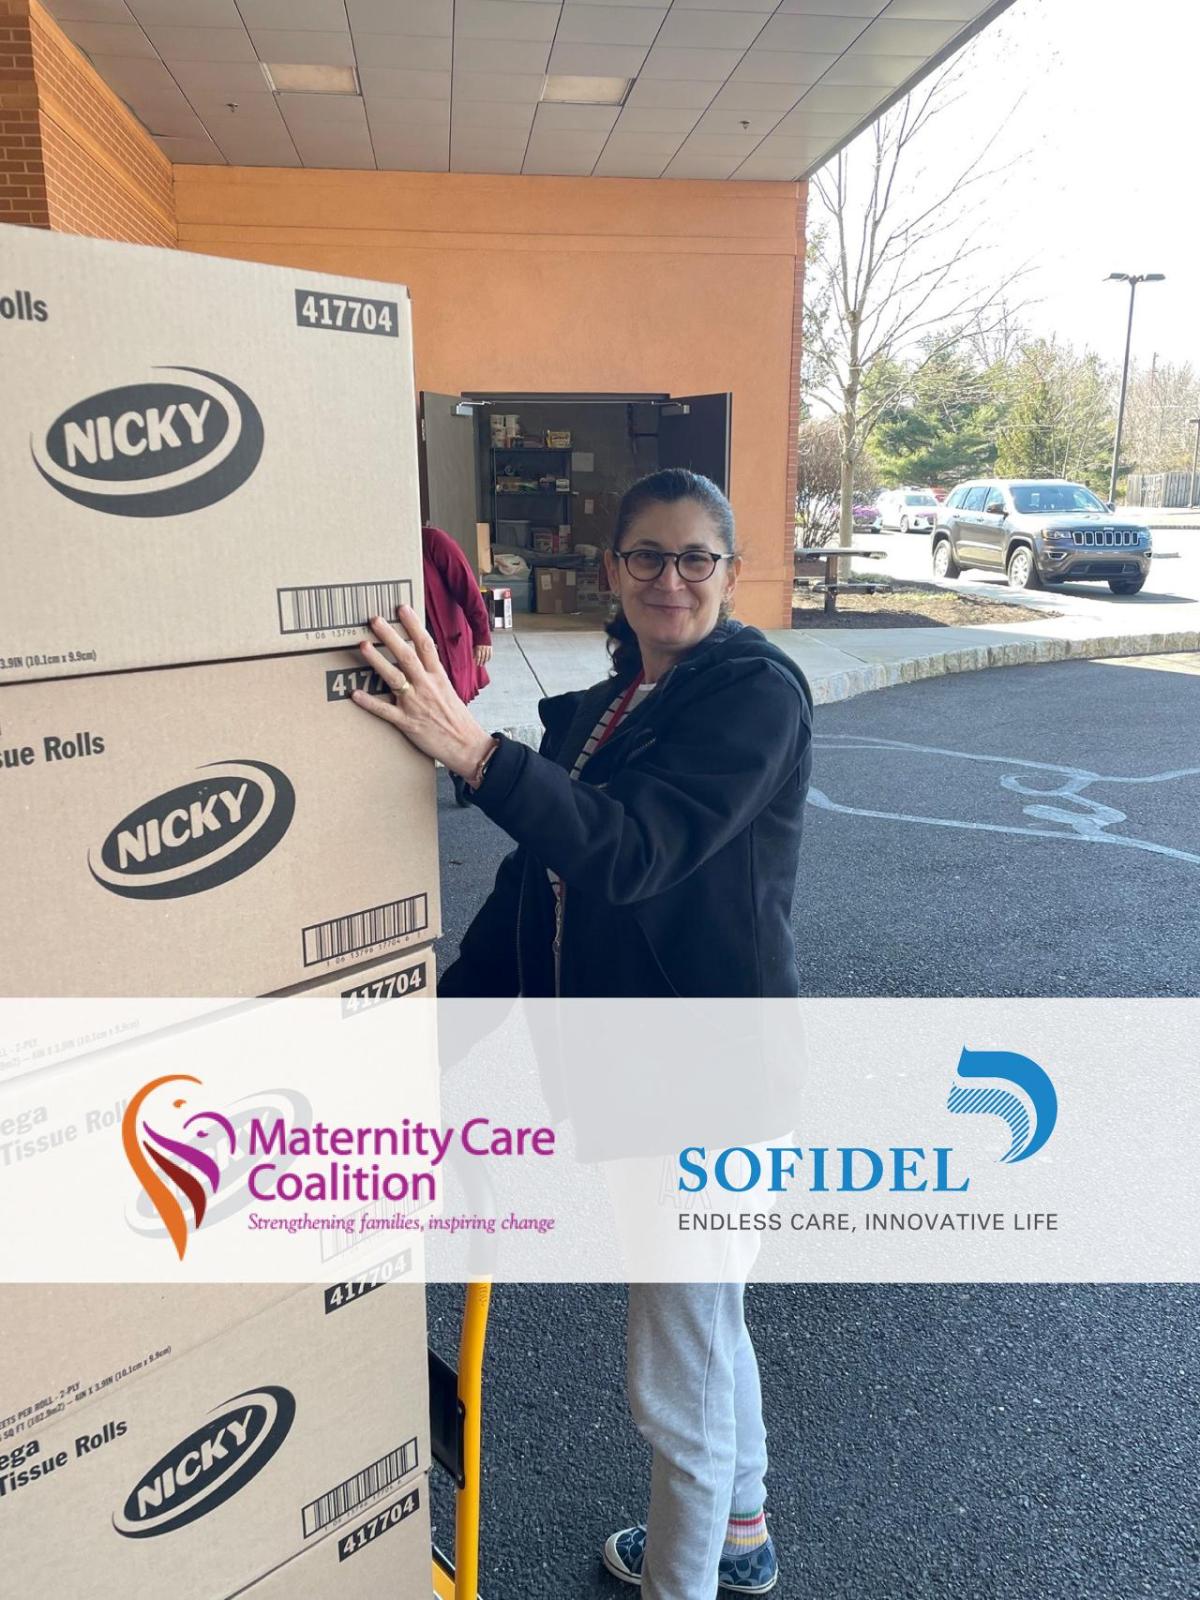 Angie Bellow, Maternity Care Coalition receiving the delivery